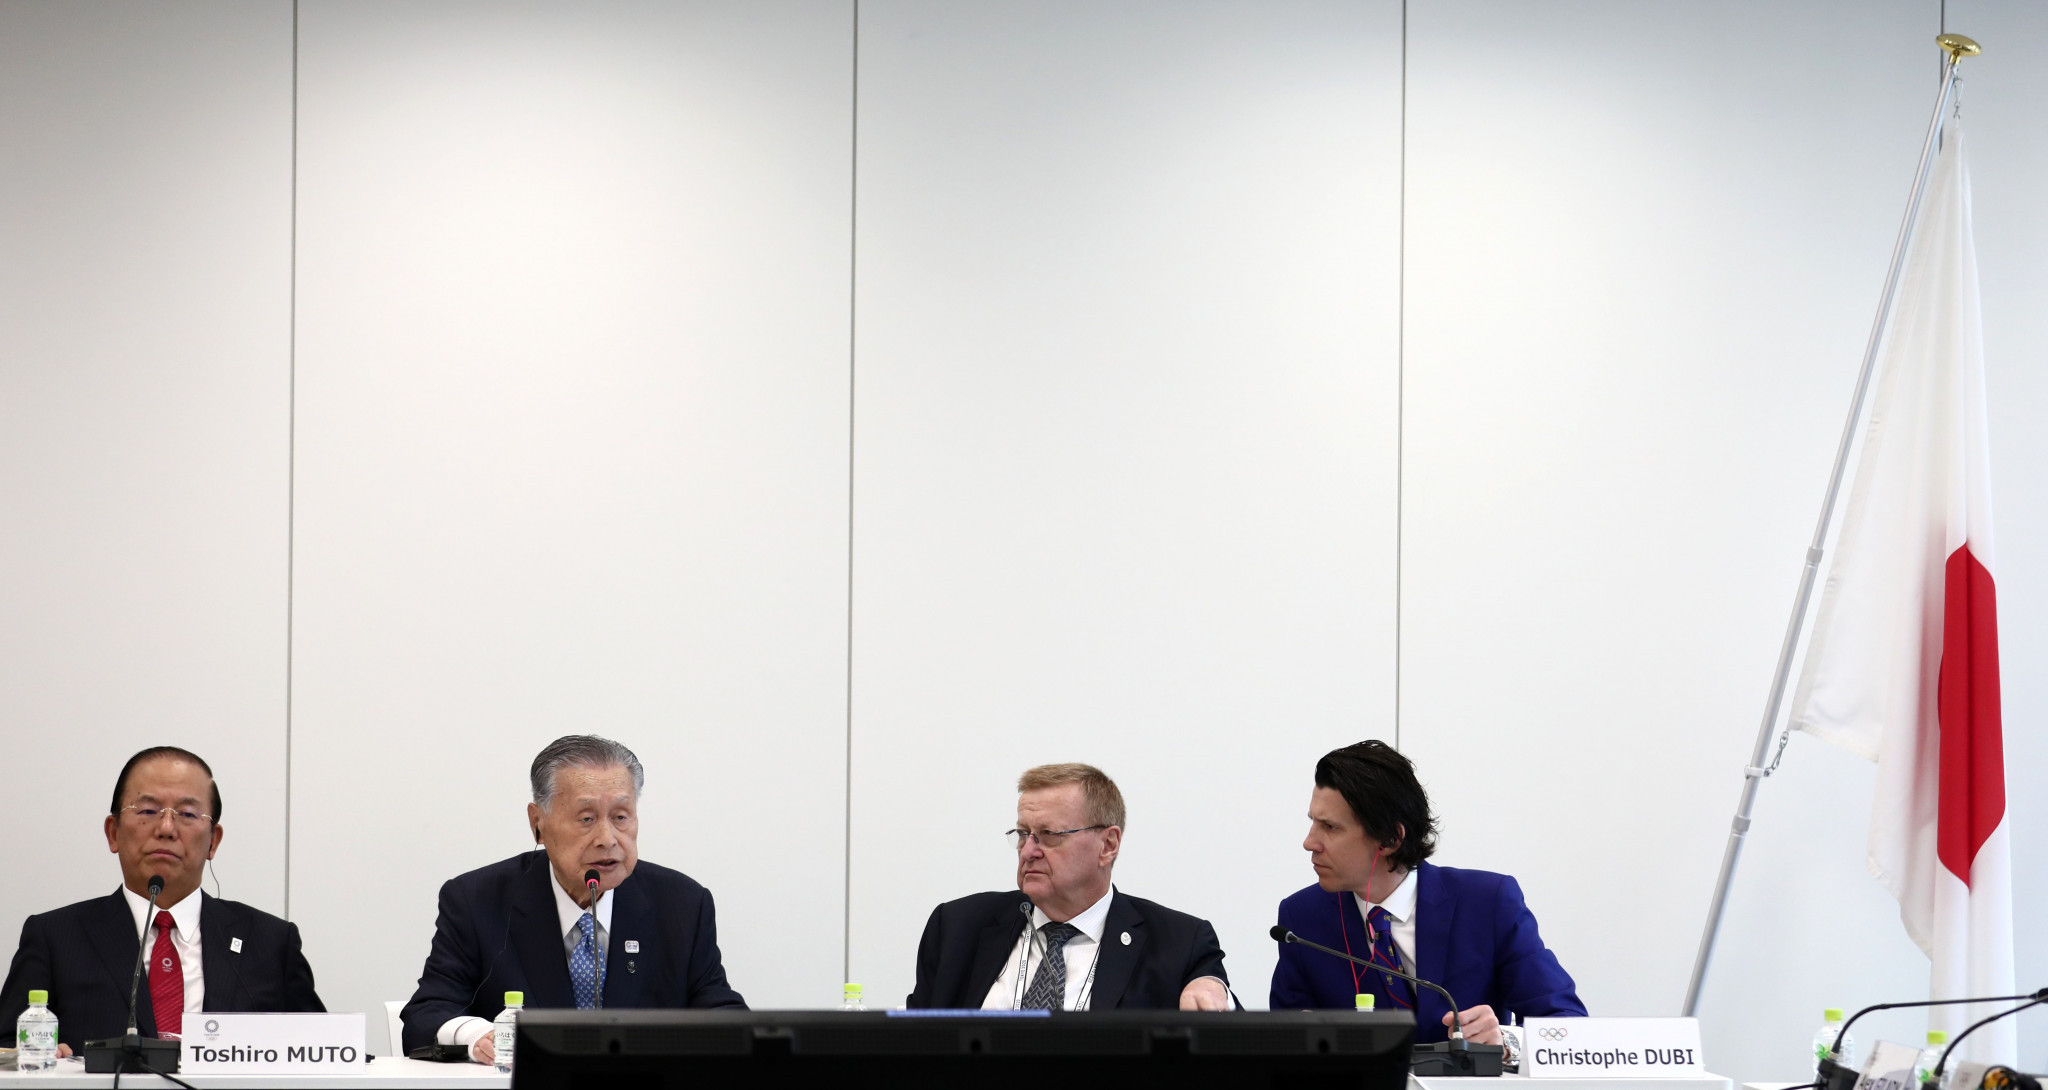 IOC Coordination Commission chairman John Coates delivered a warning that Tokyo 2020 need to address concerns of International Federations and National Olympic Committees during the opening of the Project Review ©Getty Images